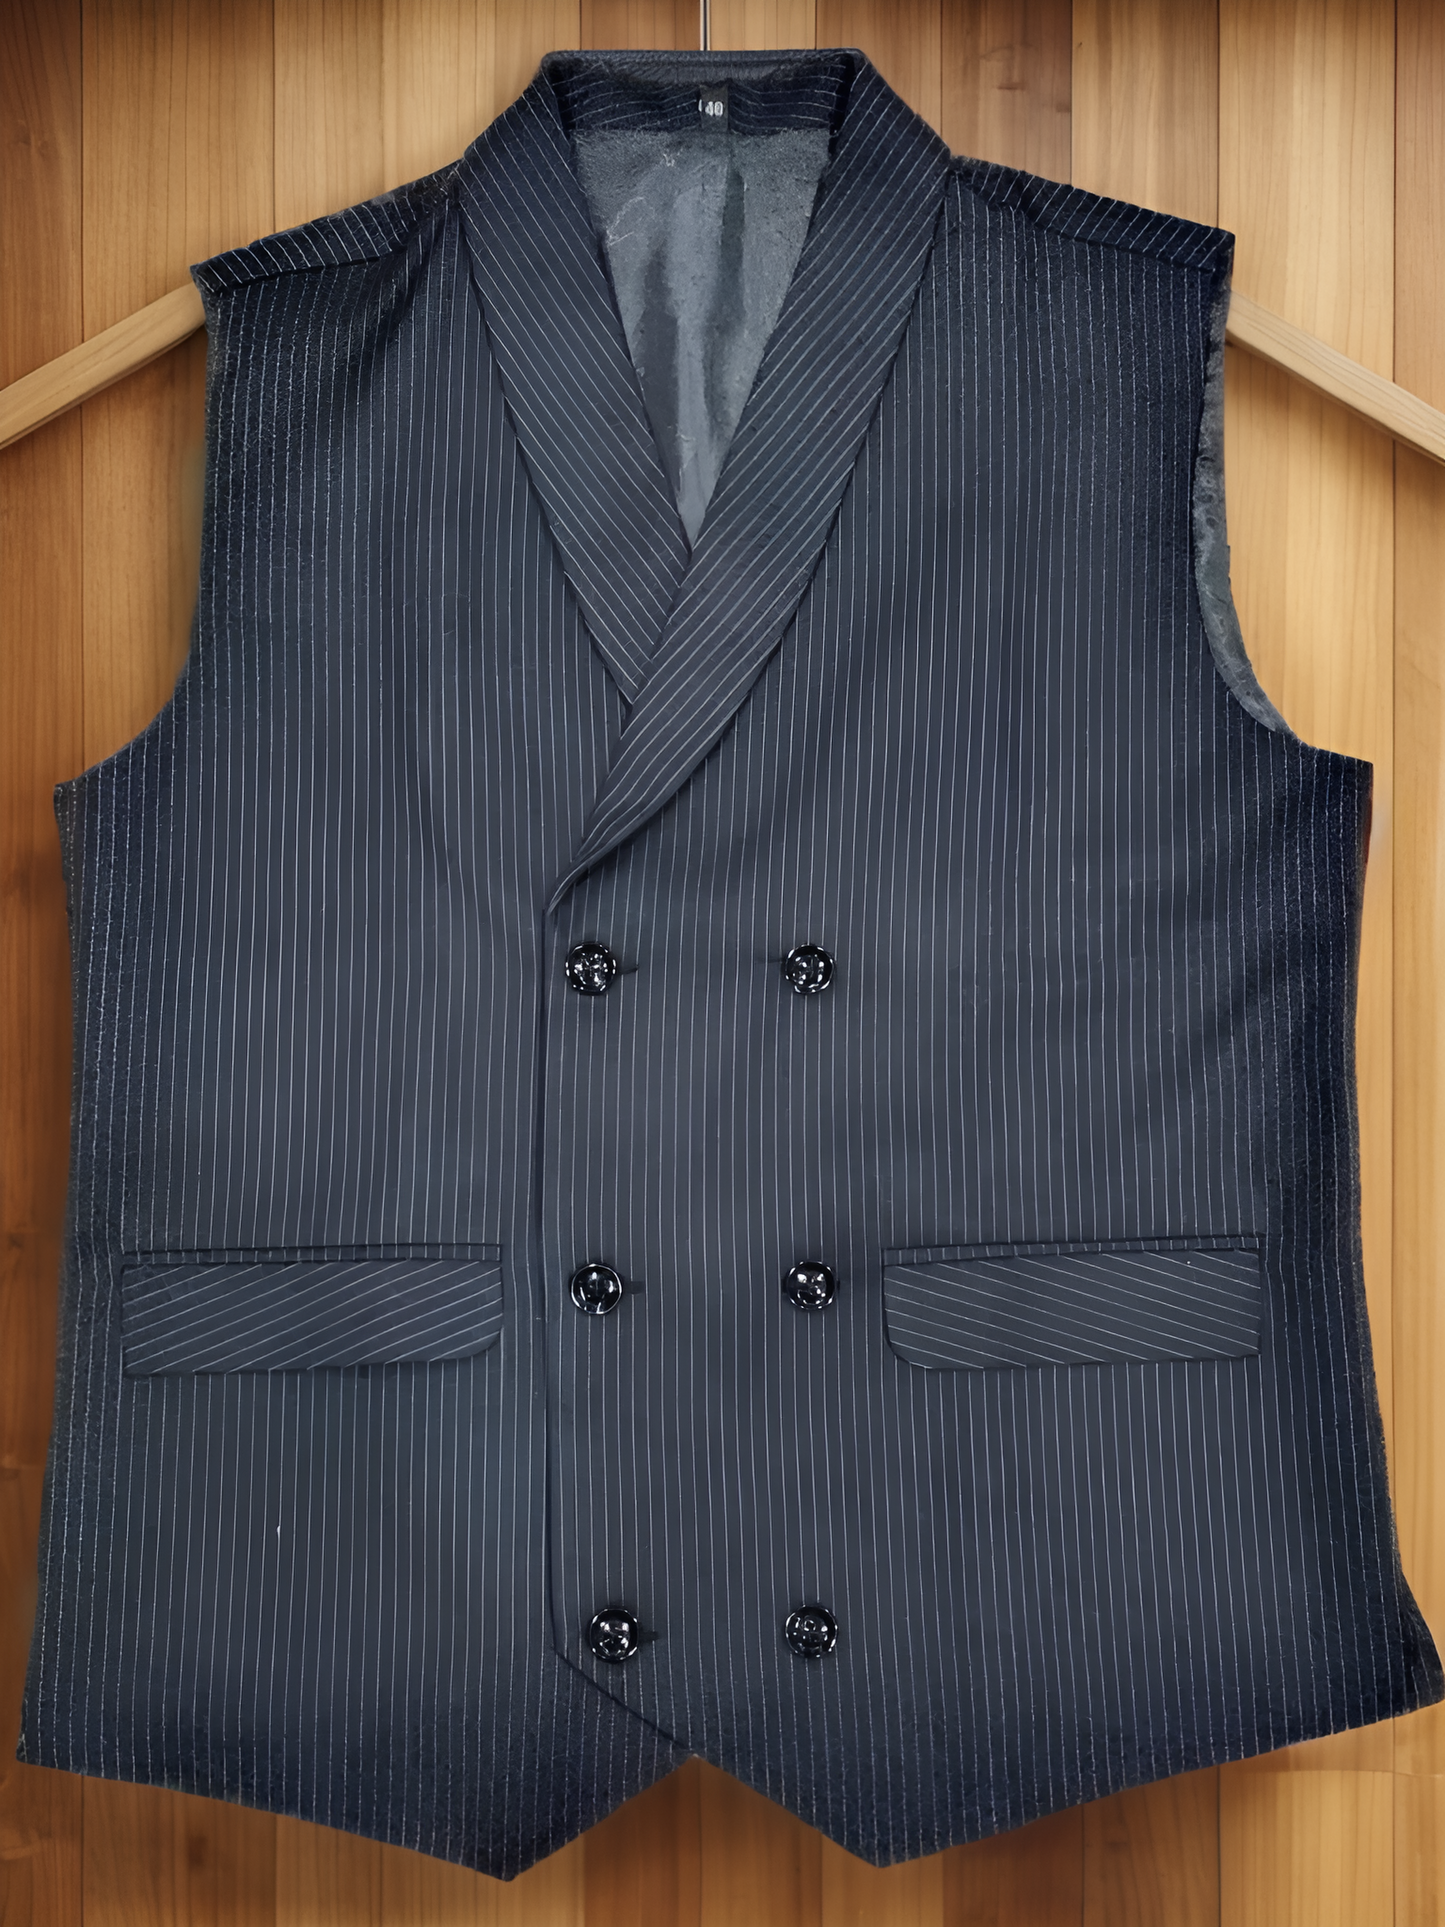 Men's Plaid Double-Breasted Charcoal Waistcoat only